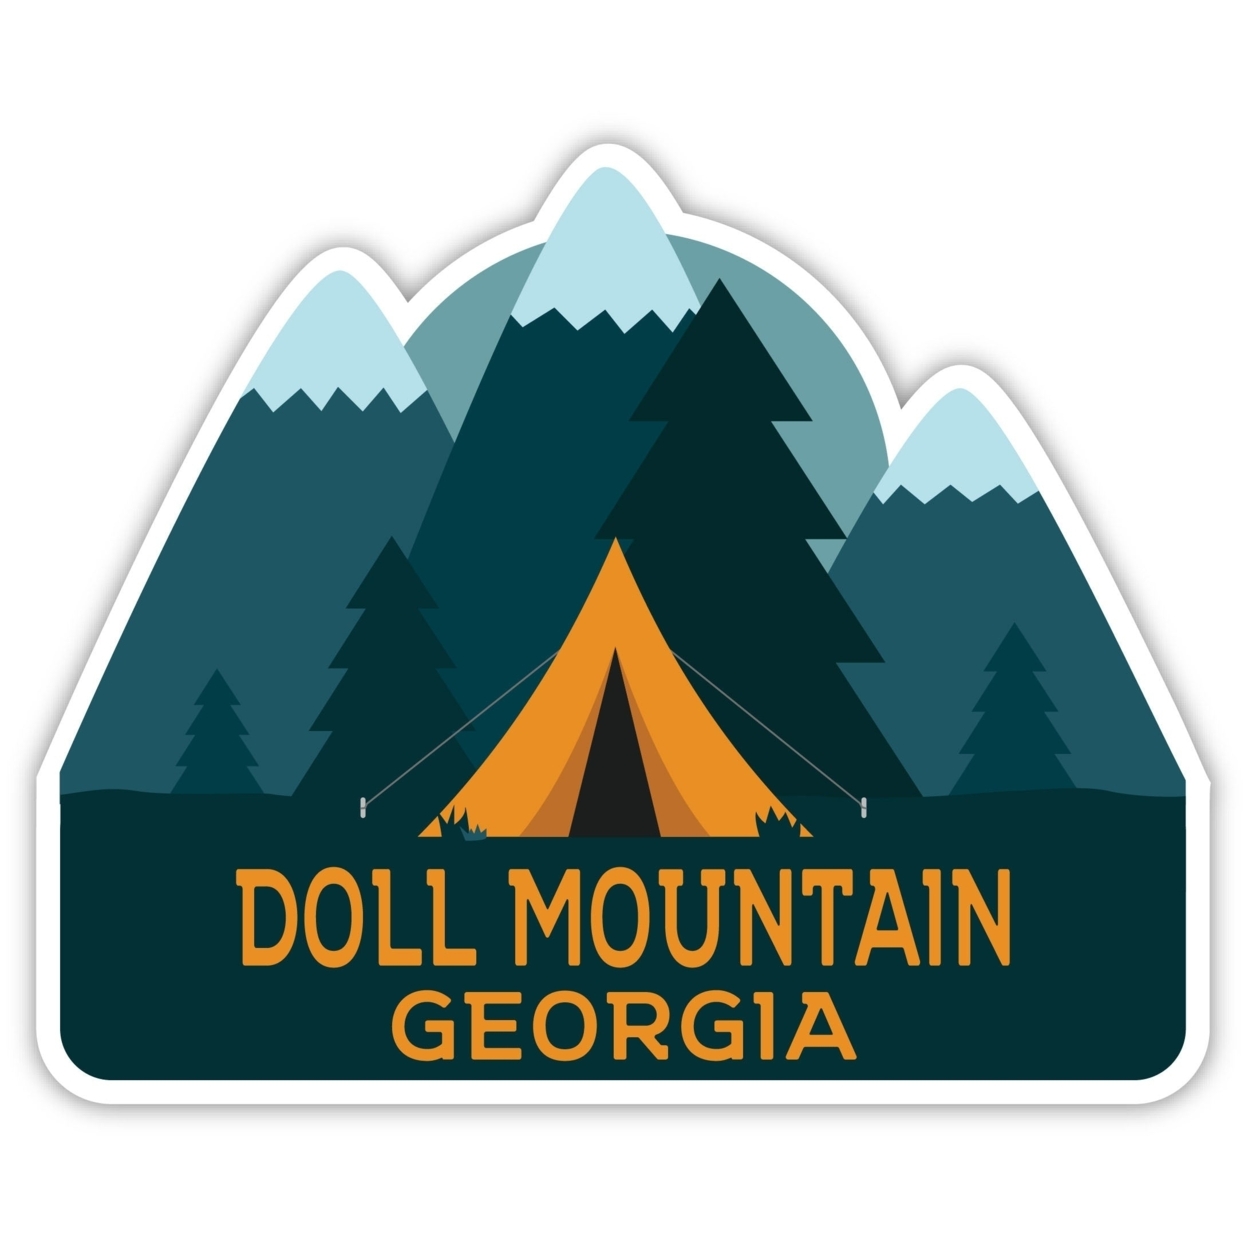 Doll Mountain Georgia Souvenir Decorative Stickers (Choose Theme And Size) - 4-Pack, 2-Inch, Tent